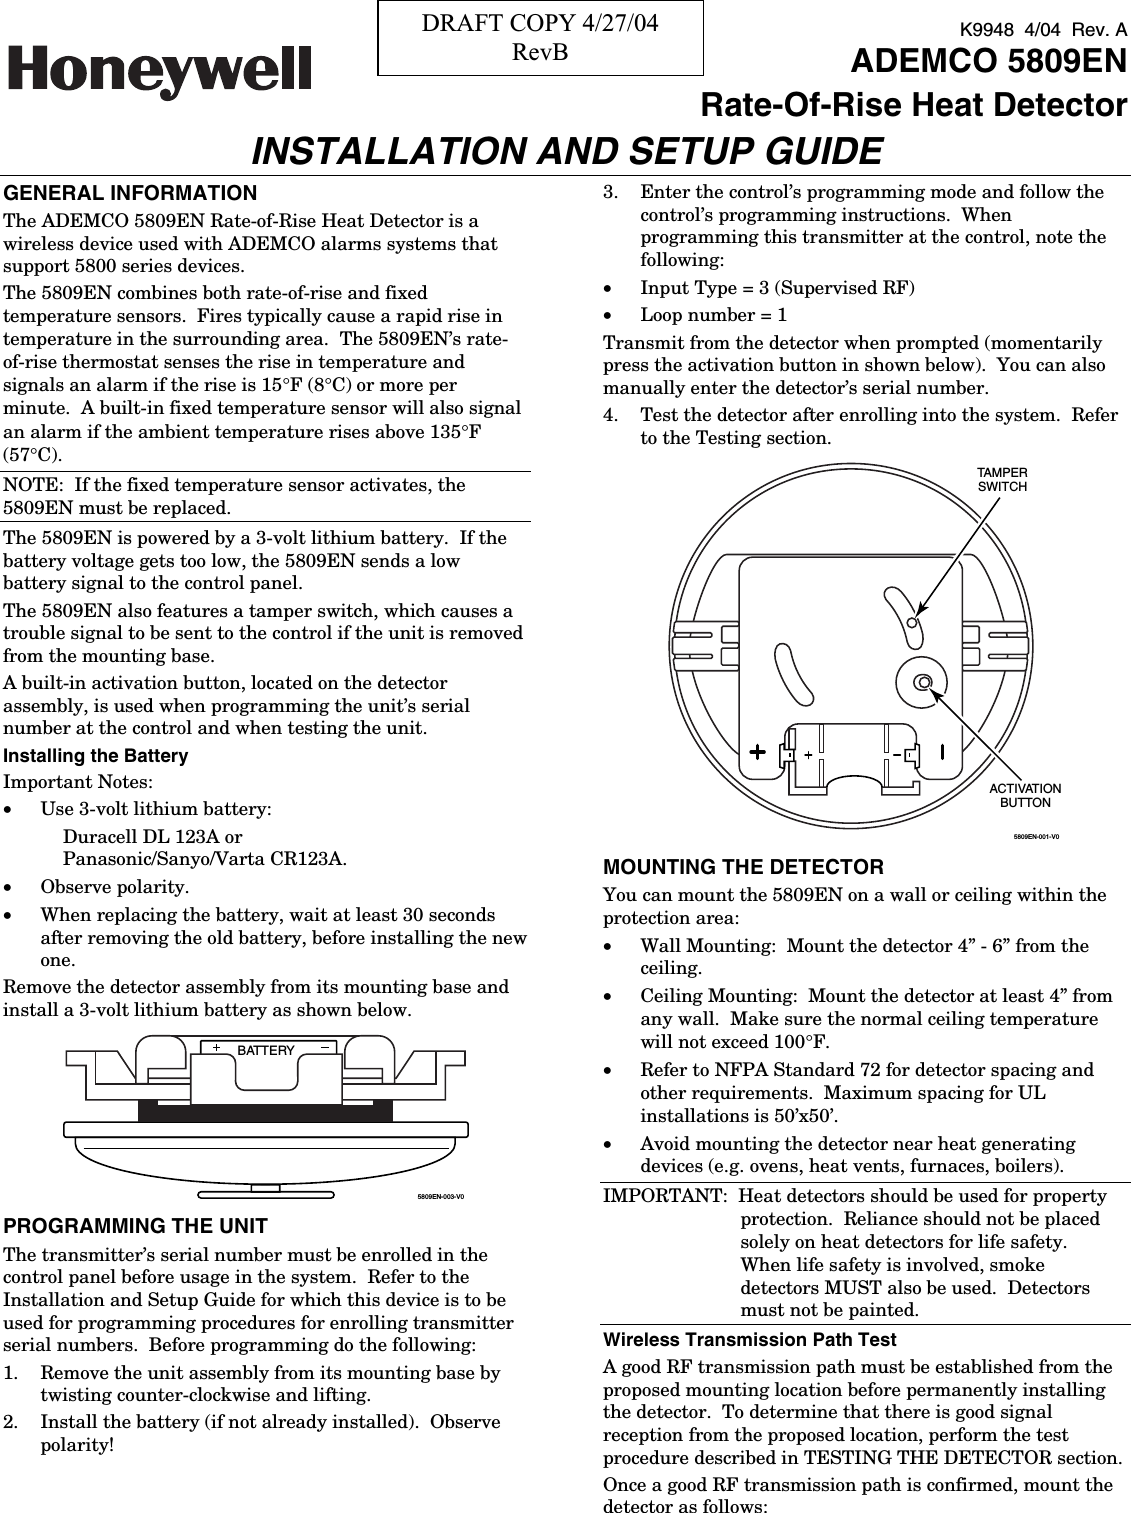 K9948  4/04  Rev. A   ADEMCO 5809EN Rate-Of-Rise Heat Detector INSTALLATION AND SETUP GUIDE GENERAL INFORMATION The ADEMCO 5809EN Rate-of-Rise Heat Detector is a wireless device used with ADEMCO alarms systems that support 5800 series devices.     The 5809EN combines both rate-of-rise and fixed temperature sensors.  Fires typically cause a rapid rise in temperature in the surrounding area.  The 5809EN’s rate-of-rise thermostat senses the rise in temperature and signals an alarm if the rise is 15°F (8°C) or more per minute.  A built-in fixed temperature sensor will also signal an alarm if the ambient temperature rises above 135°F (57°C).   NOTE:  If the fixed temperature sensor activates, the 5809EN must be replaced.   The 5809EN is powered by a 3-volt lithium battery.  If the battery voltage gets too low, the 5809EN sends a low battery signal to the control panel.   The 5809EN also features a tamper switch, which causes a trouble signal to be sent to the control if the unit is removed from the mounting base.   A built-in activation button, located on the detector assembly, is used when programming the unit’s serial number at the control and when testing the unit.   Installing the Battery Important Notes:   •  Use 3-volt lithium battery:   Duracell DL 123A or  Panasonic/Sanyo/Varta CR123A.   •  Observe polarity.   •  When replacing the battery, wait at least 30 seconds after removing the old battery, before installing the new one.   Remove the detector assembly from its mounting base and install a 3-volt lithium battery as shown below.   BATTERY5809EN-003-V0 PROGRAMMING THE UNIT The transmitter’s serial number must be enrolled in the control panel before usage in the system.  Refer to the Installation and Setup Guide for which this device is to be used for programming procedures for enrolling transmitter serial numbers.  Before programming do the following:   1.  Remove the unit assembly from its mounting base by twisting counter-clockwise and lifting.   2.  Install the battery (if not already installed).  Observe polarity!   3.  Enter the control’s programming mode and follow the control’s programming instructions.  When programming this transmitter at the control, note the following:   •  Input Type = 3 (Supervised RF) •  Loop number = 1 Transmit from the detector when prompted (momentarily press the activation button in shown below).  You can also manually enter the detector’s serial number.   4.  Test the detector after enrolling into the system.  Refer to the Testing section.   5809EN-001-V0ACTIVATIONBUTTONTAMPERSWITCH MOUNTING THE DETECTOR You can mount the 5809EN on a wall or ceiling within the protection area:   •  Wall Mounting:  Mount the detector 4” - 6” from the ceiling.   •  Ceiling Mounting:  Mount the detector at least 4” from any wall.  Make sure the normal ceiling temperature will not exceed 100°F.   •  Refer to NFPA Standard 72 for detector spacing and other requirements.  Maximum spacing for UL installations is 50’x50’.   •  Avoid mounting the detector near heat generating devices (e.g. ovens, heat vents, furnaces, boilers).   IMPORTANT:  Heat detectors should be used for property protection.  Reliance should not be placed solely on heat detectors for life safety.  When life safety is involved, smoke detectors MUST also be used.  Detectors must not be painted.   Wireless Transmission Path Test A good RF transmission path must be established from the proposed mounting location before permanently installing the detector.  To determine that there is good signal reception from the proposed location, perform the test procedure described in TESTING THE DETECTOR section.   Once a good RF transmission path is confirmed, mount the detector as follows:   DRAFT COPY 4/27/04 RevB 